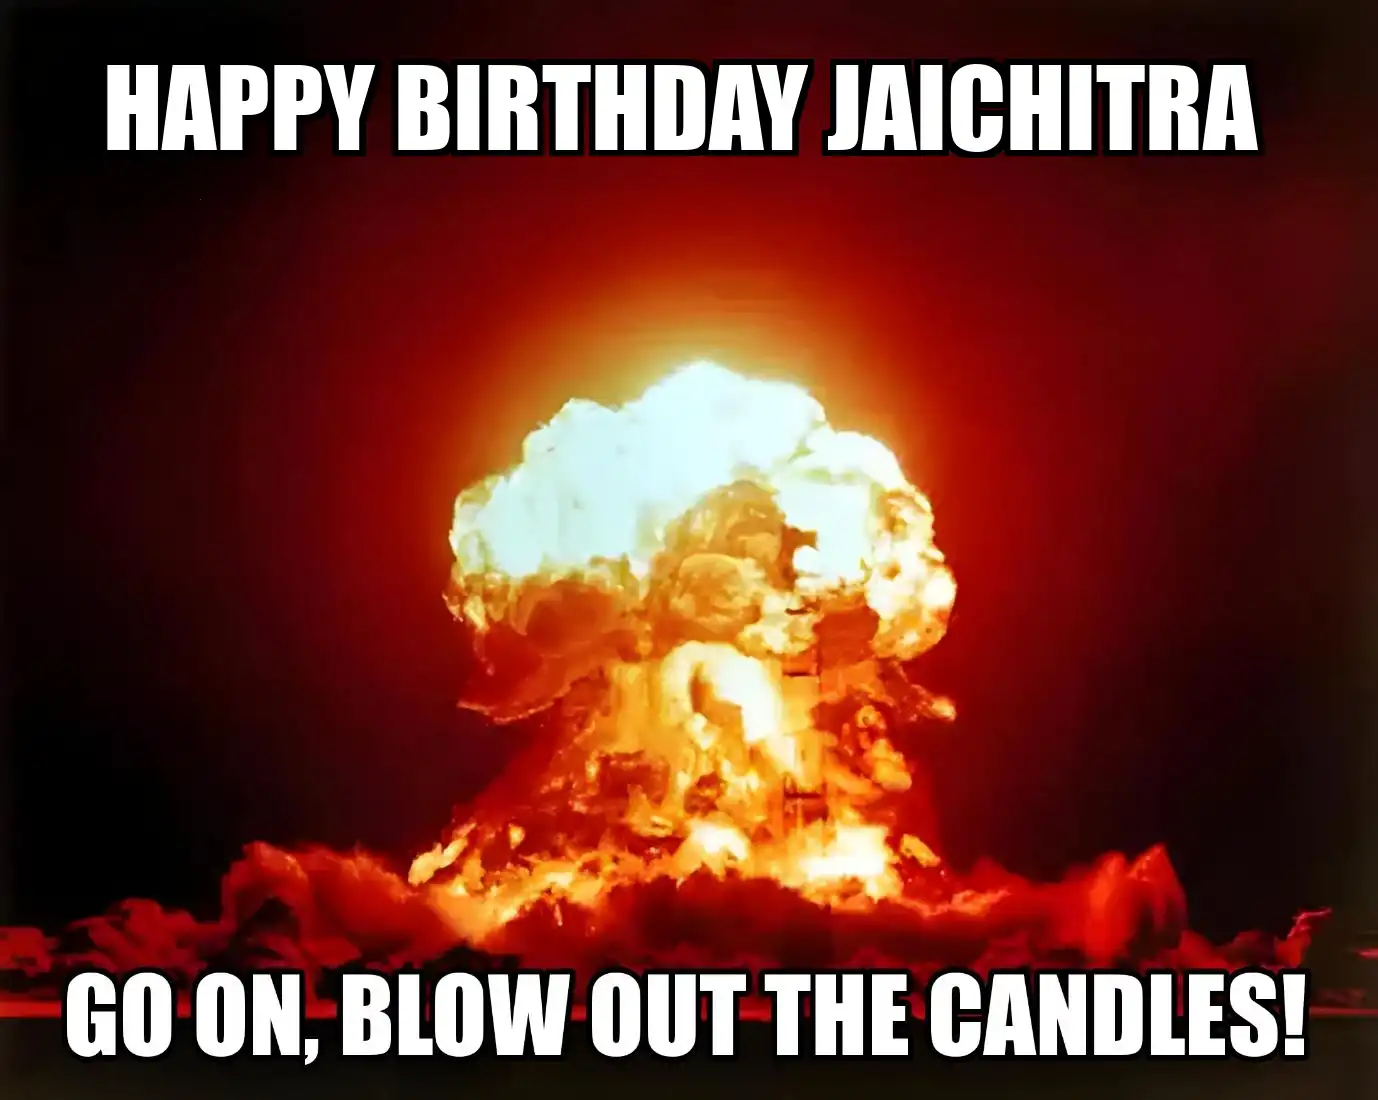 Happy Birthday Jaichitra Go On Blow Out The Candles Meme